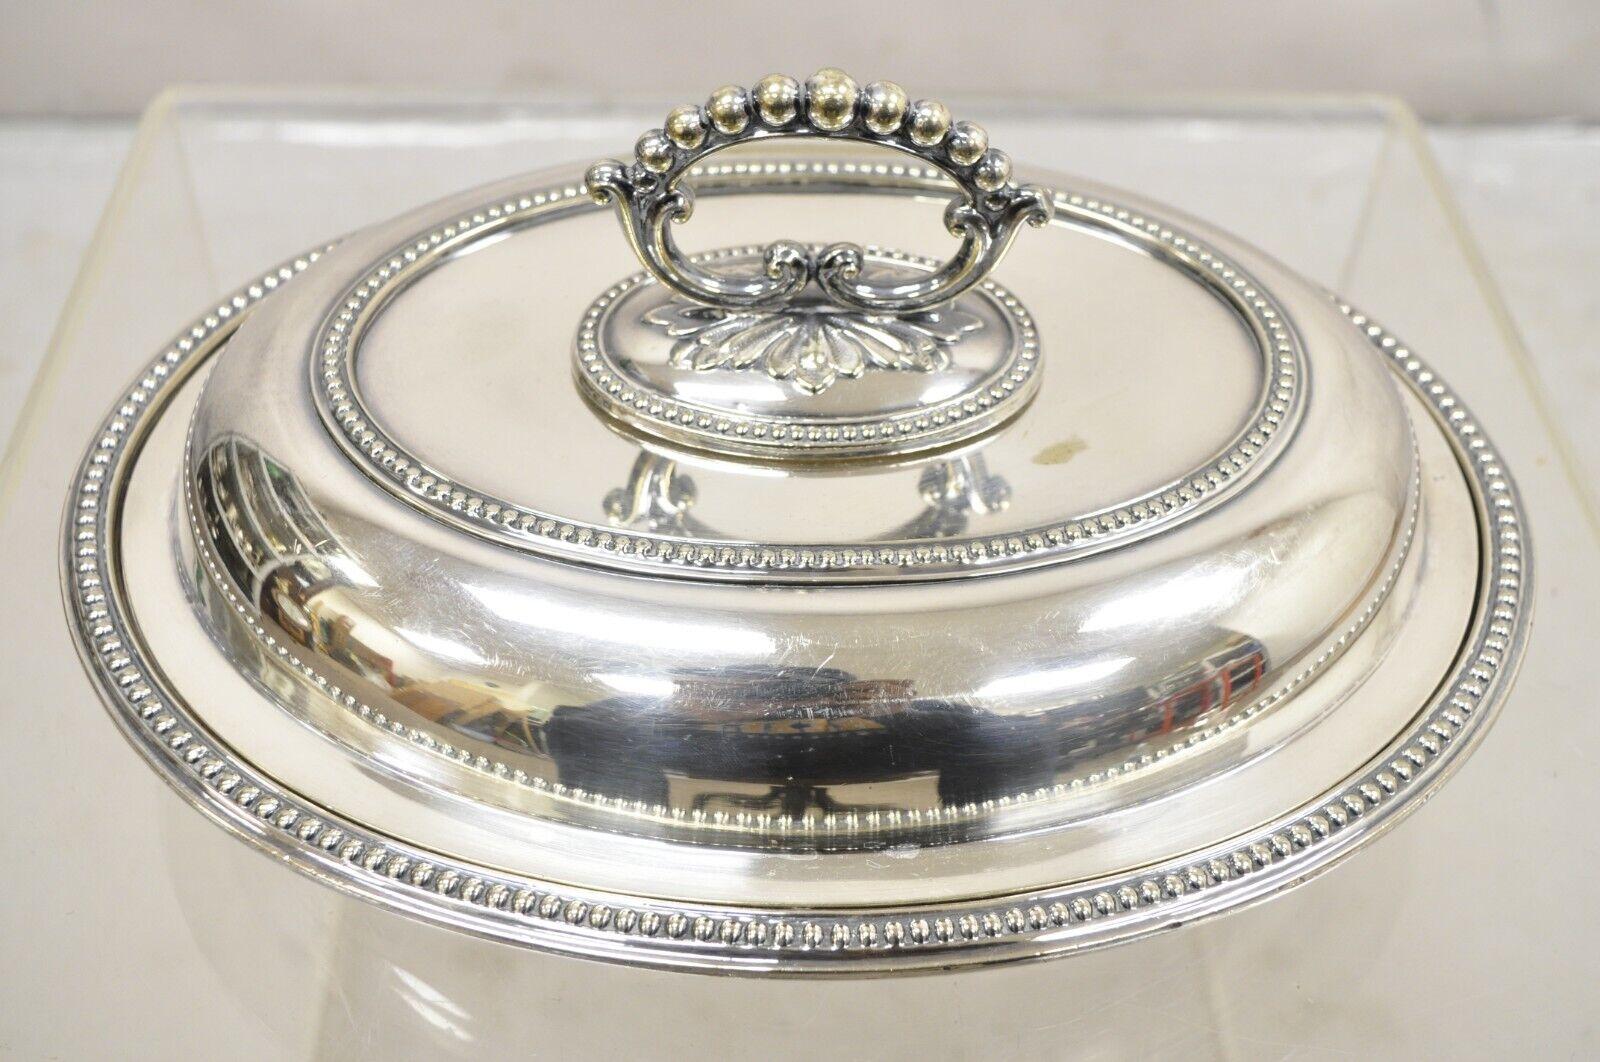 Antike Mappin & Webb's Prince's Plate English Sheffield Silver Plated Covered Serving Dish. Verzierter abnehmbarer Griff, ovale Form, Originalpunze. CIRCA Anfang des 20. Jahrhunderts. Abmessungen: 6